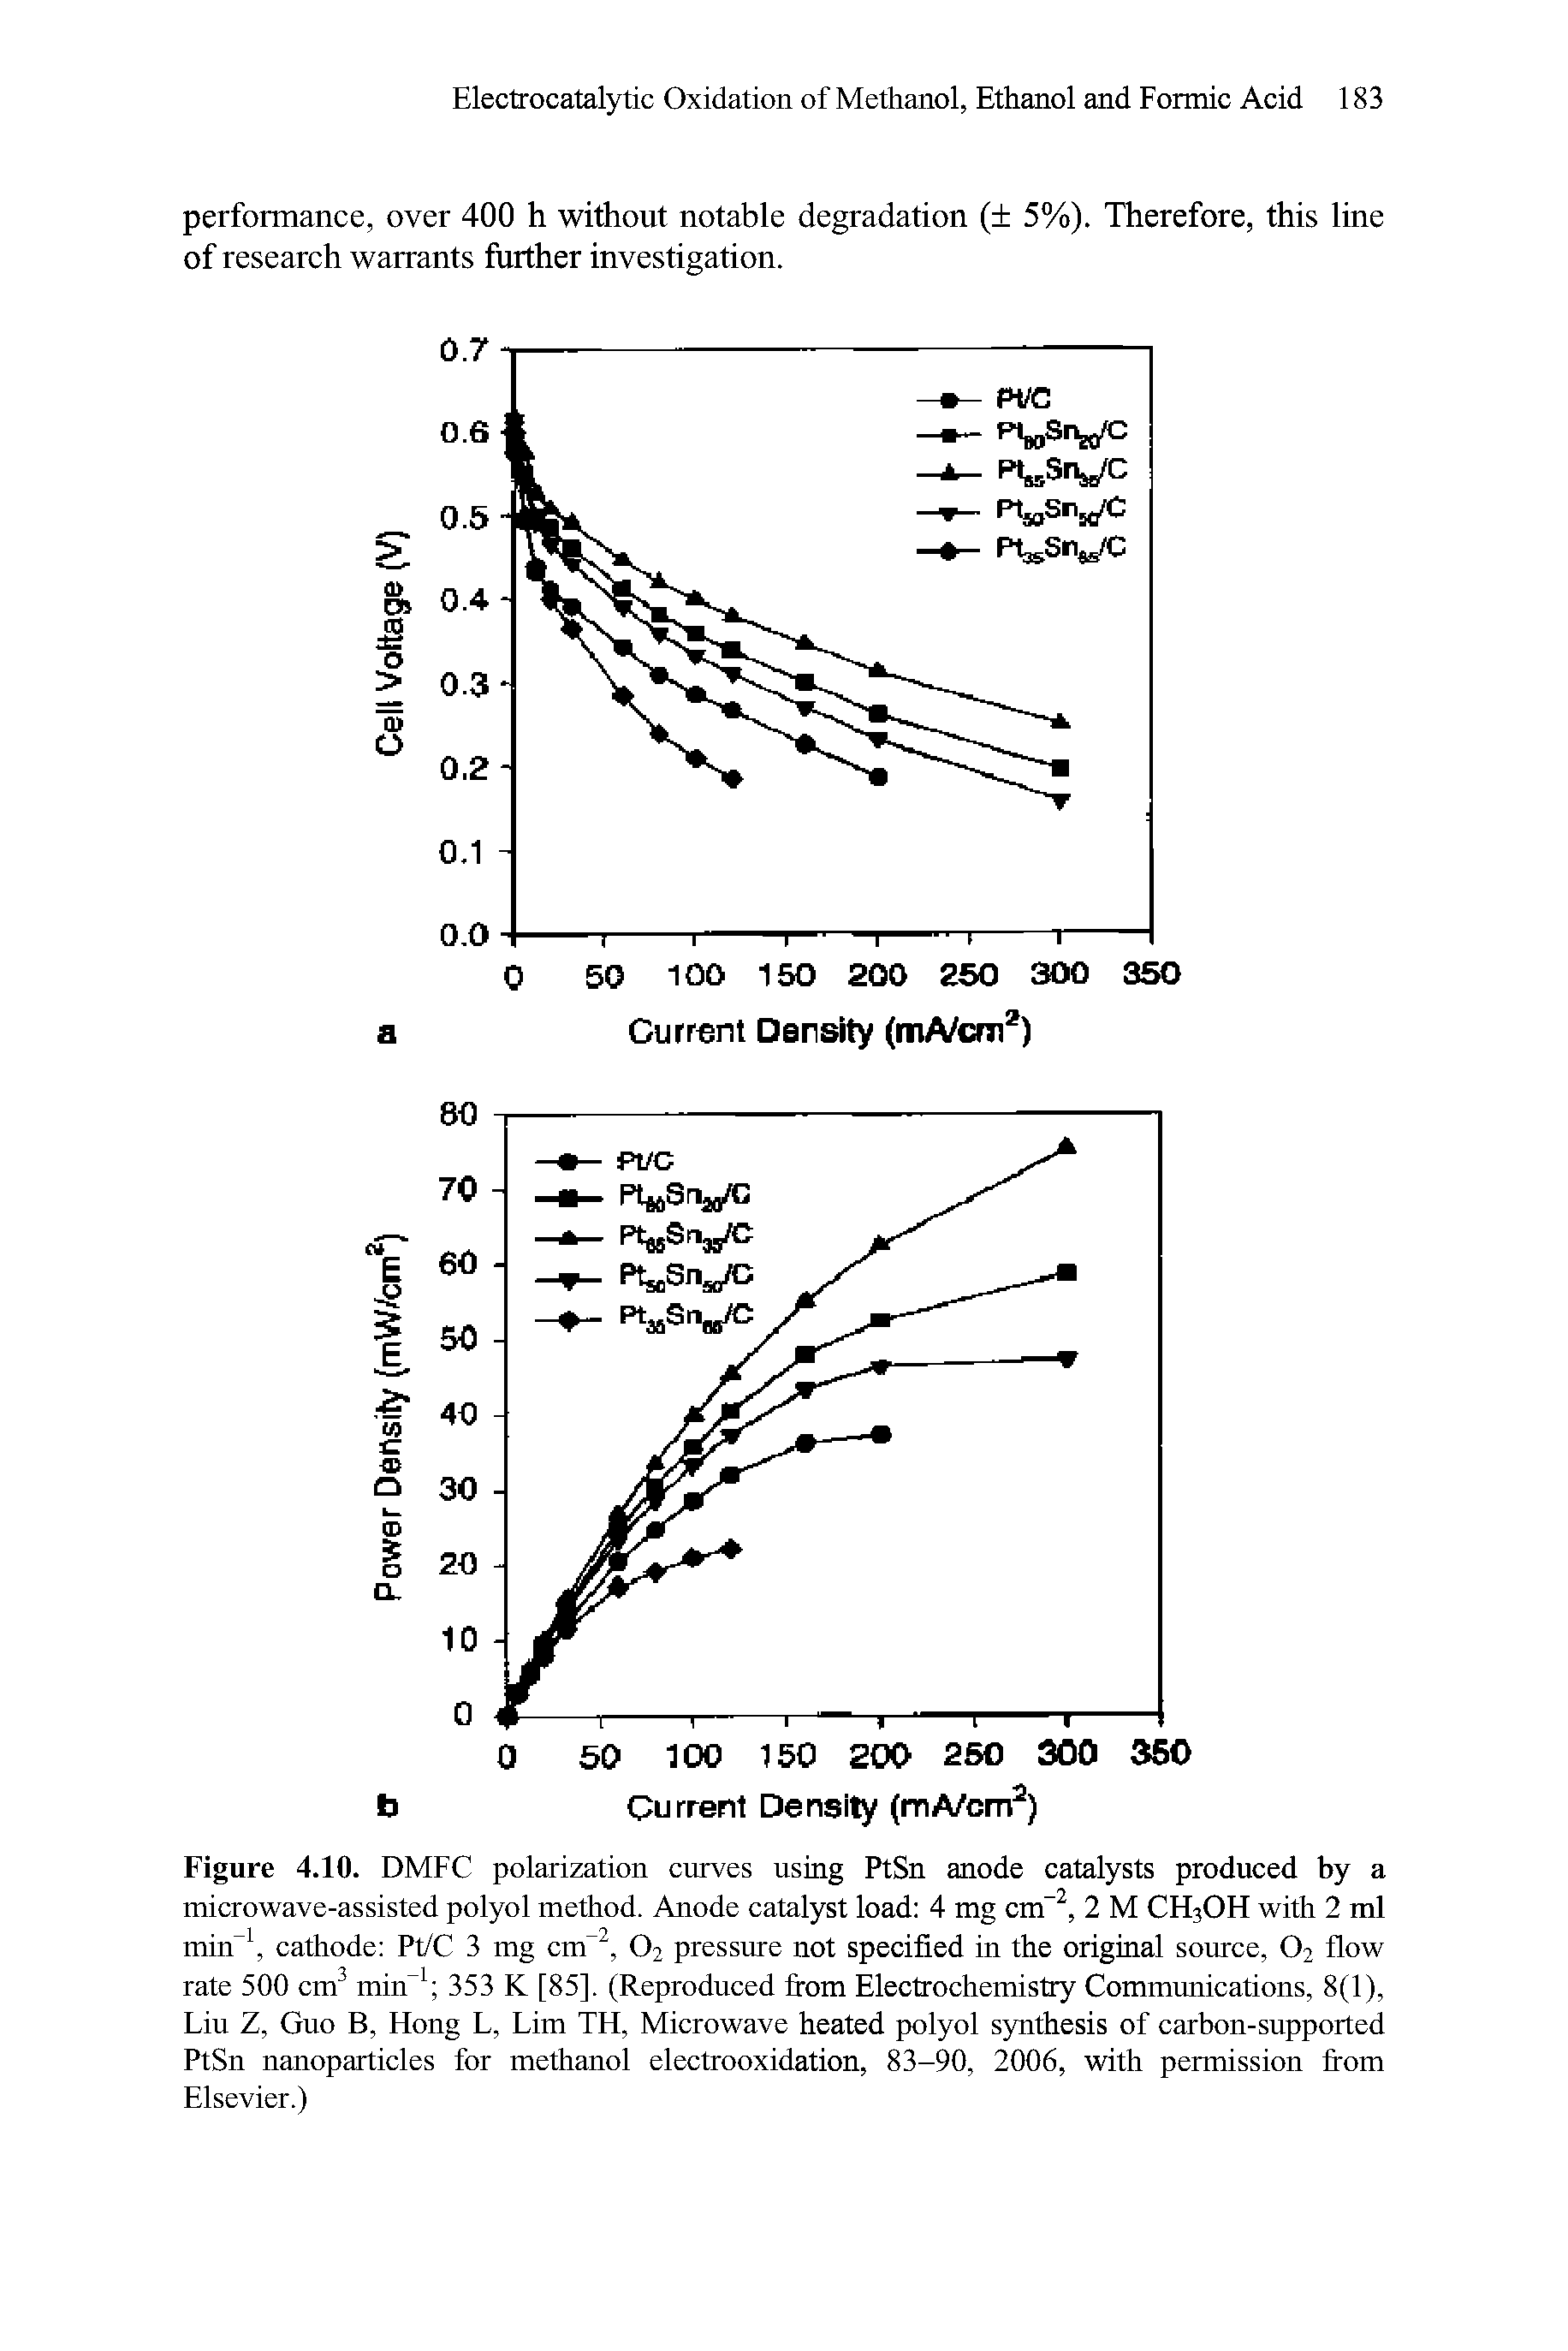 Figure 4.10. DMFC polarization curves using PtSn anode catalysts produced by a microwave-assisted polyol method. Anode catalyst load 4 mg cm , 2 M CH3OH with 2 ml min cathode Pt/C 3 mg cm , O2 pressure not specified in the original source, O2 flow rate 500 cm min 353 K [85]. (Reproduced from Electrochemistry Communications, 8(1), Liu Z, Guo B, Hong L, Lim TH, Microwave heated polyol synthesis of carbon-supported PtSn nanoparticles for methanol electrooxidation, 83-90, 2006, with permission from Elsevier.)...